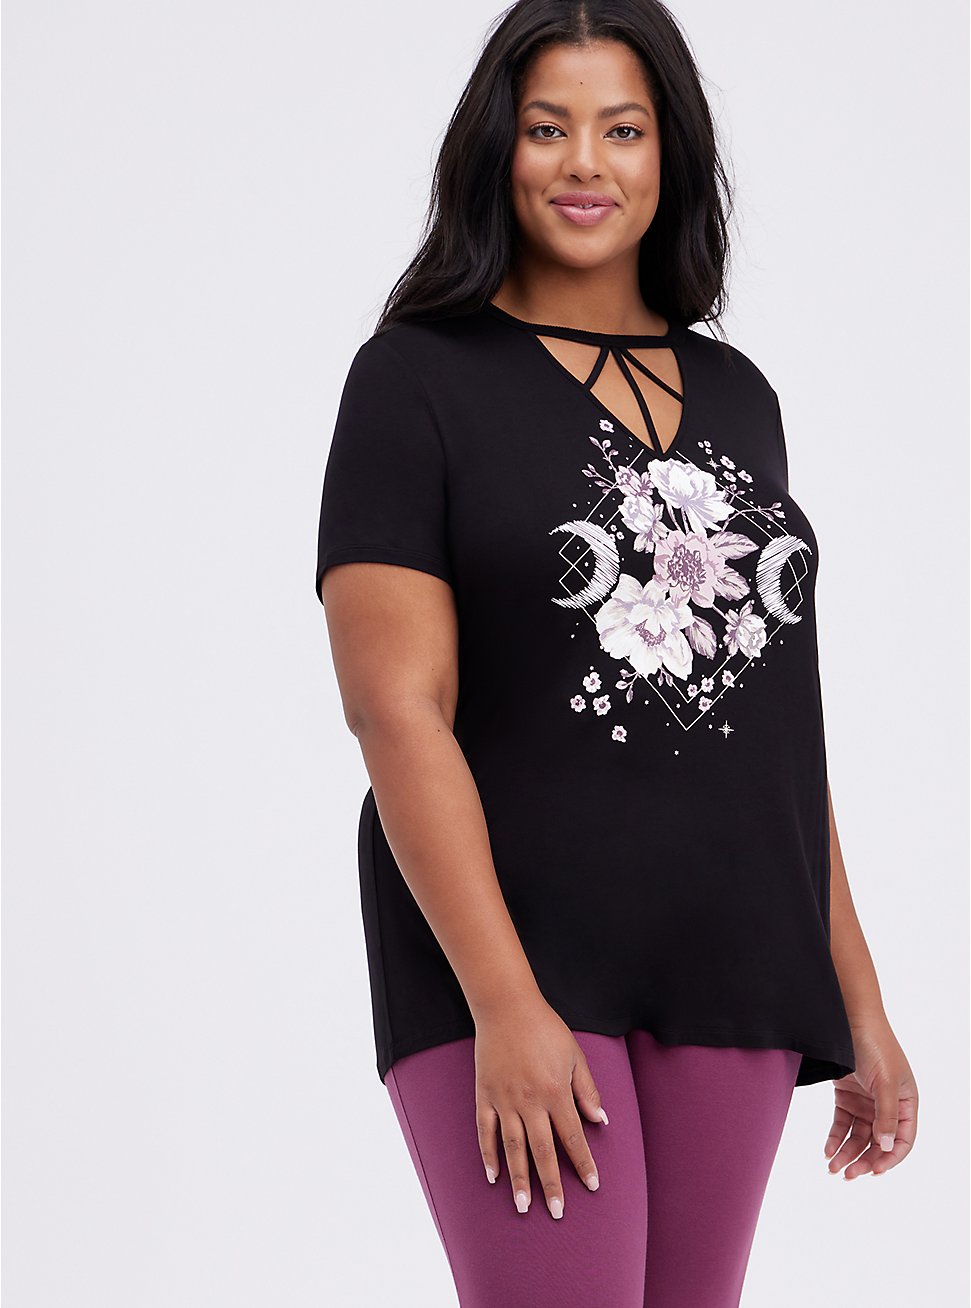 Plus Size Classic Fit Strappy Tee - Floral Moon Black, DEEP BLACK, hi-res